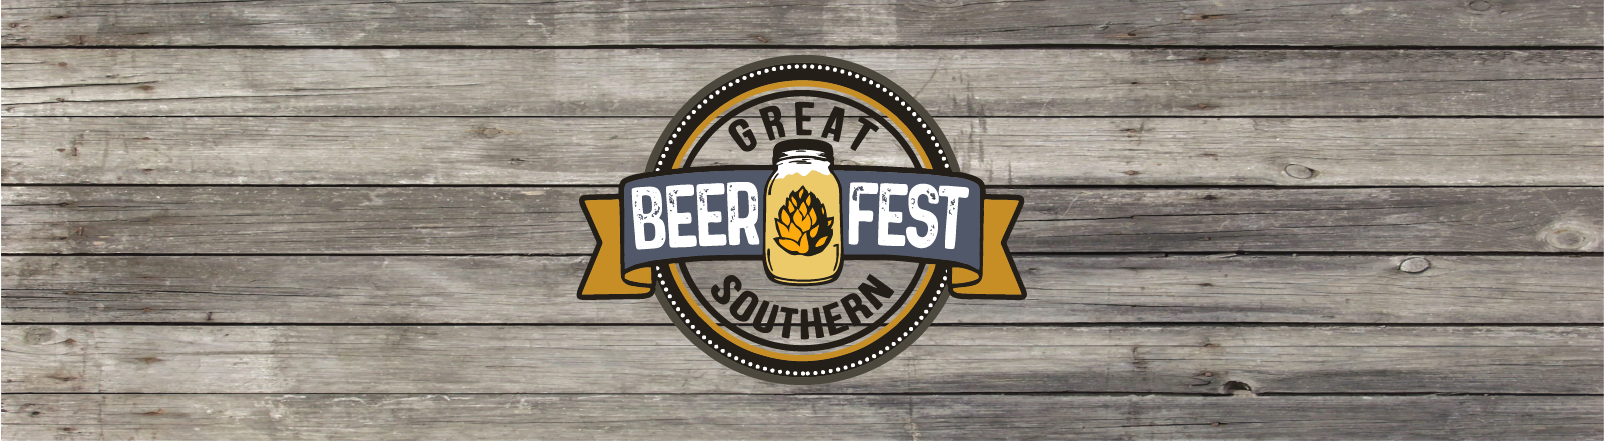 Great Southern Beer Fest - Atlanta Edition banner image